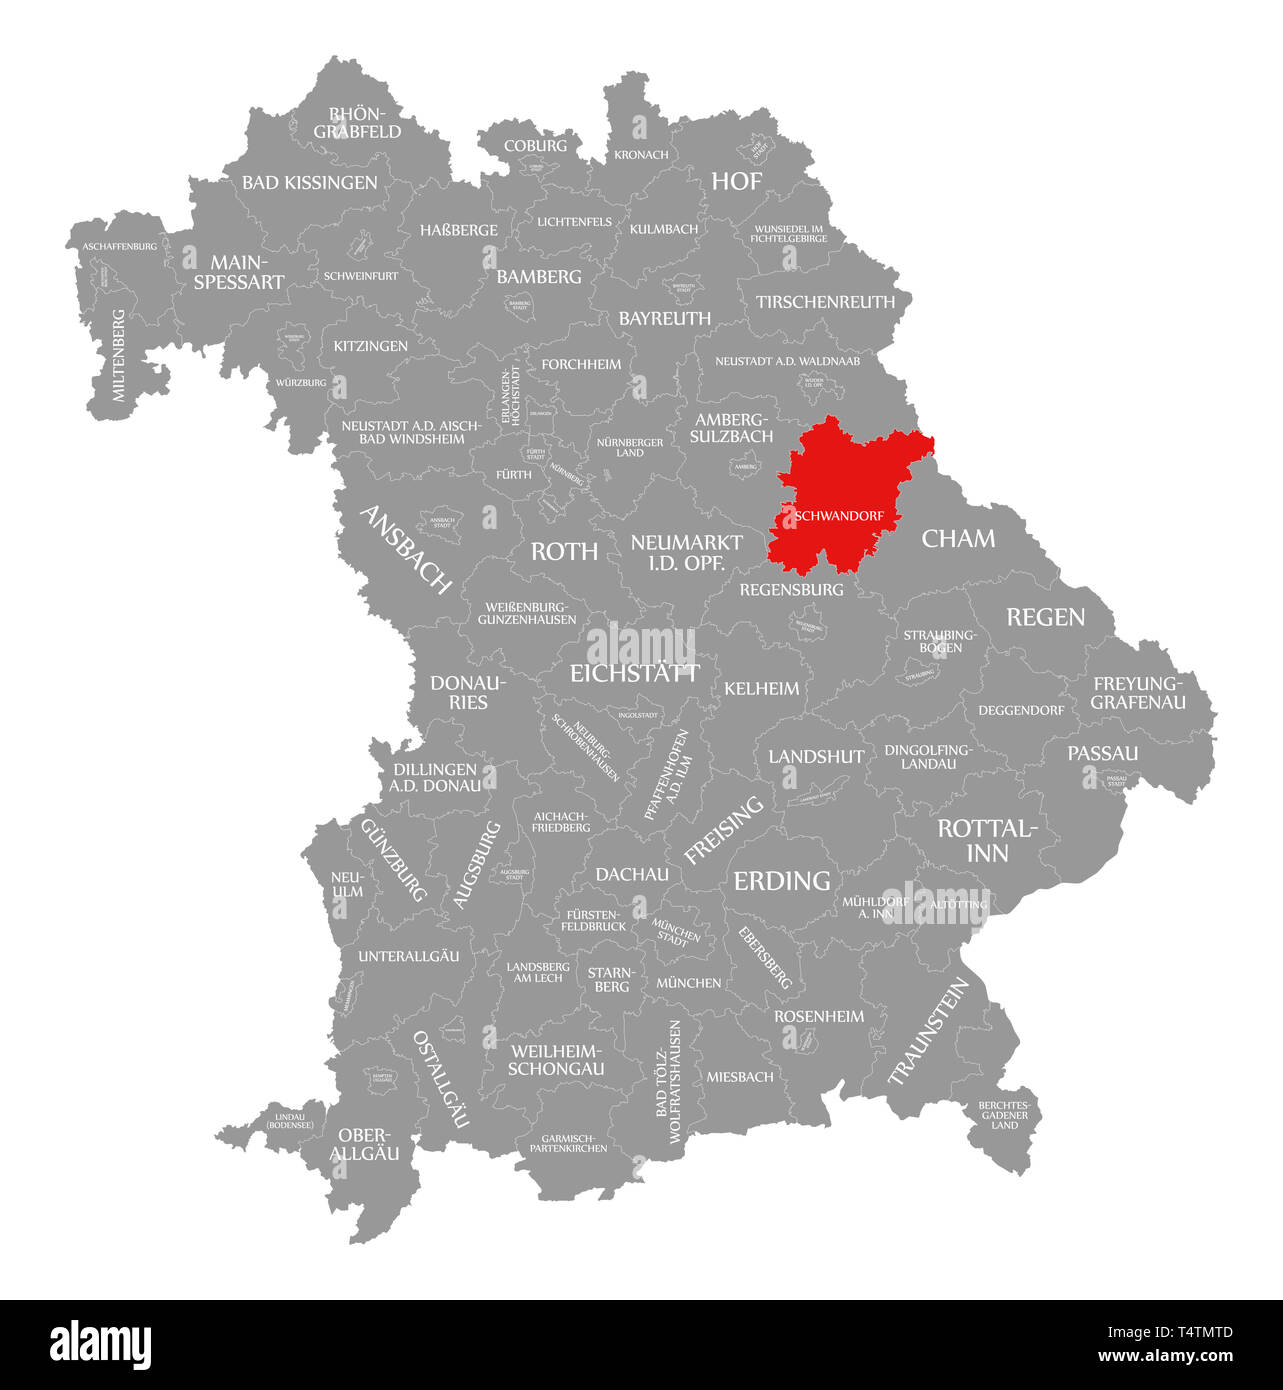 Schwandorf county red highlighted in map of Bavaria Germany Stock Photo